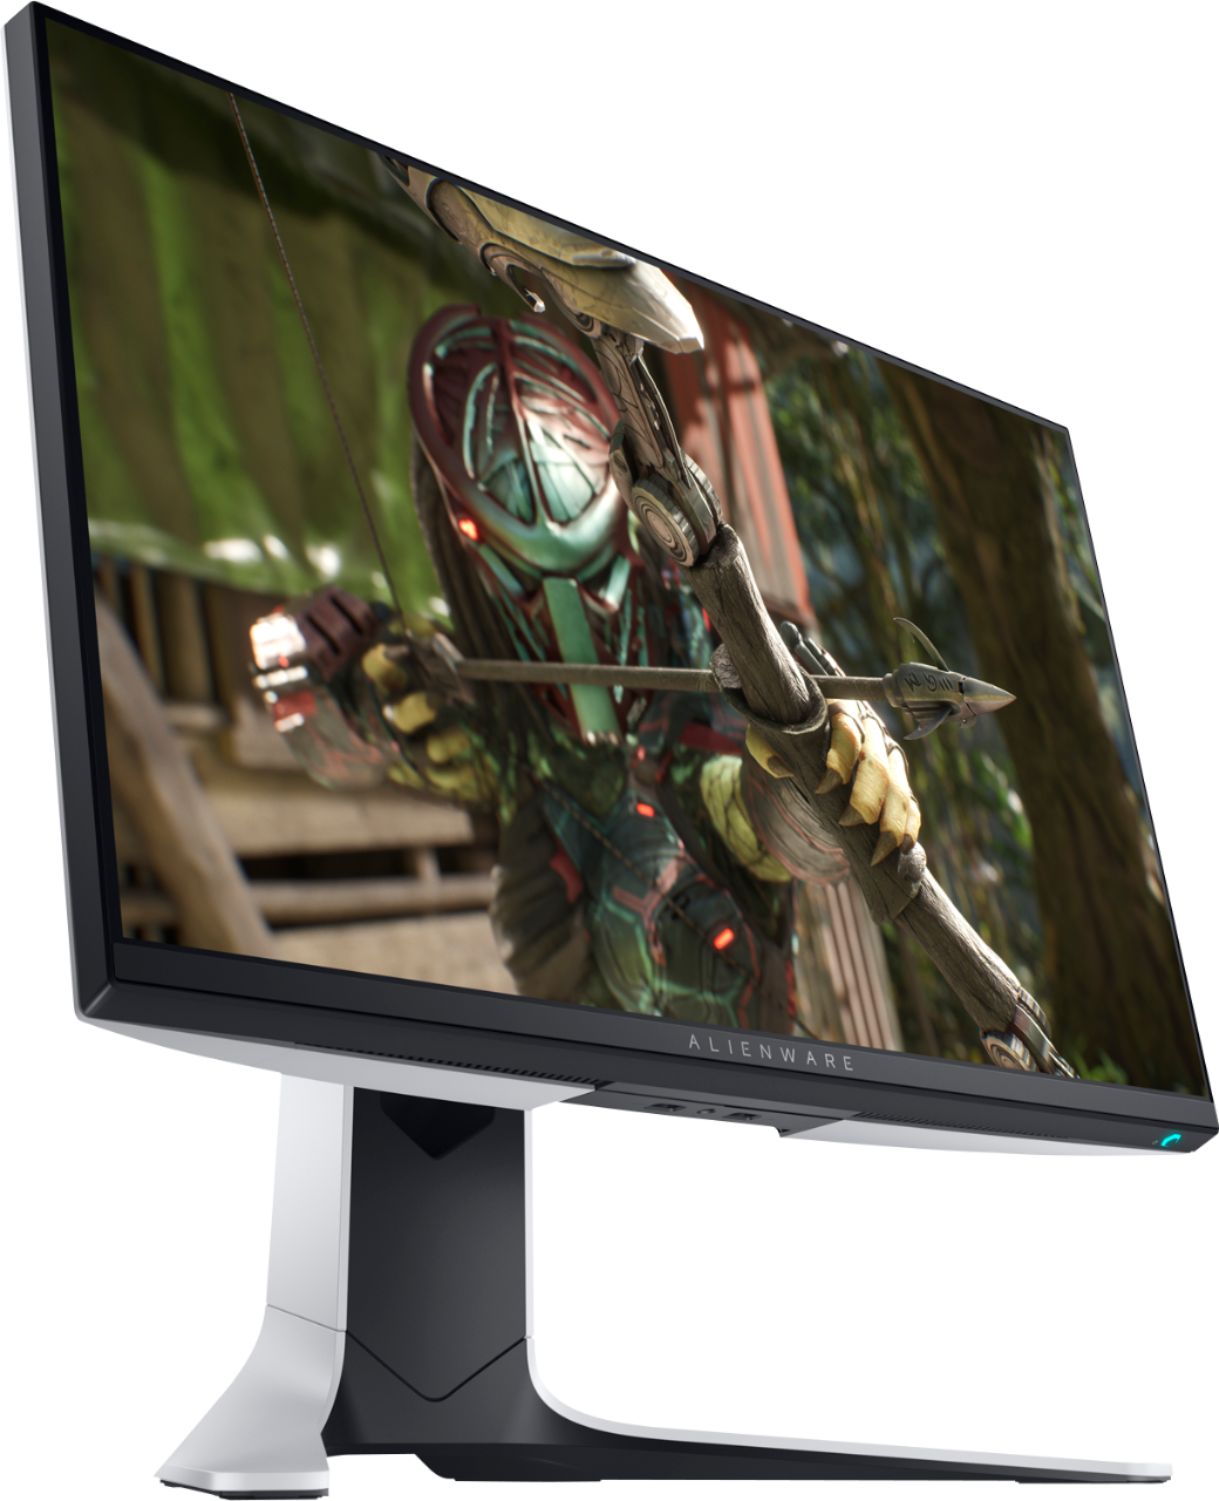 Angle View: Alienware - Geek Squad Certified Refurbished 24.5" IPS LED FHD FreeSync and G-SYNC Compatible Monitor - Lunar Light